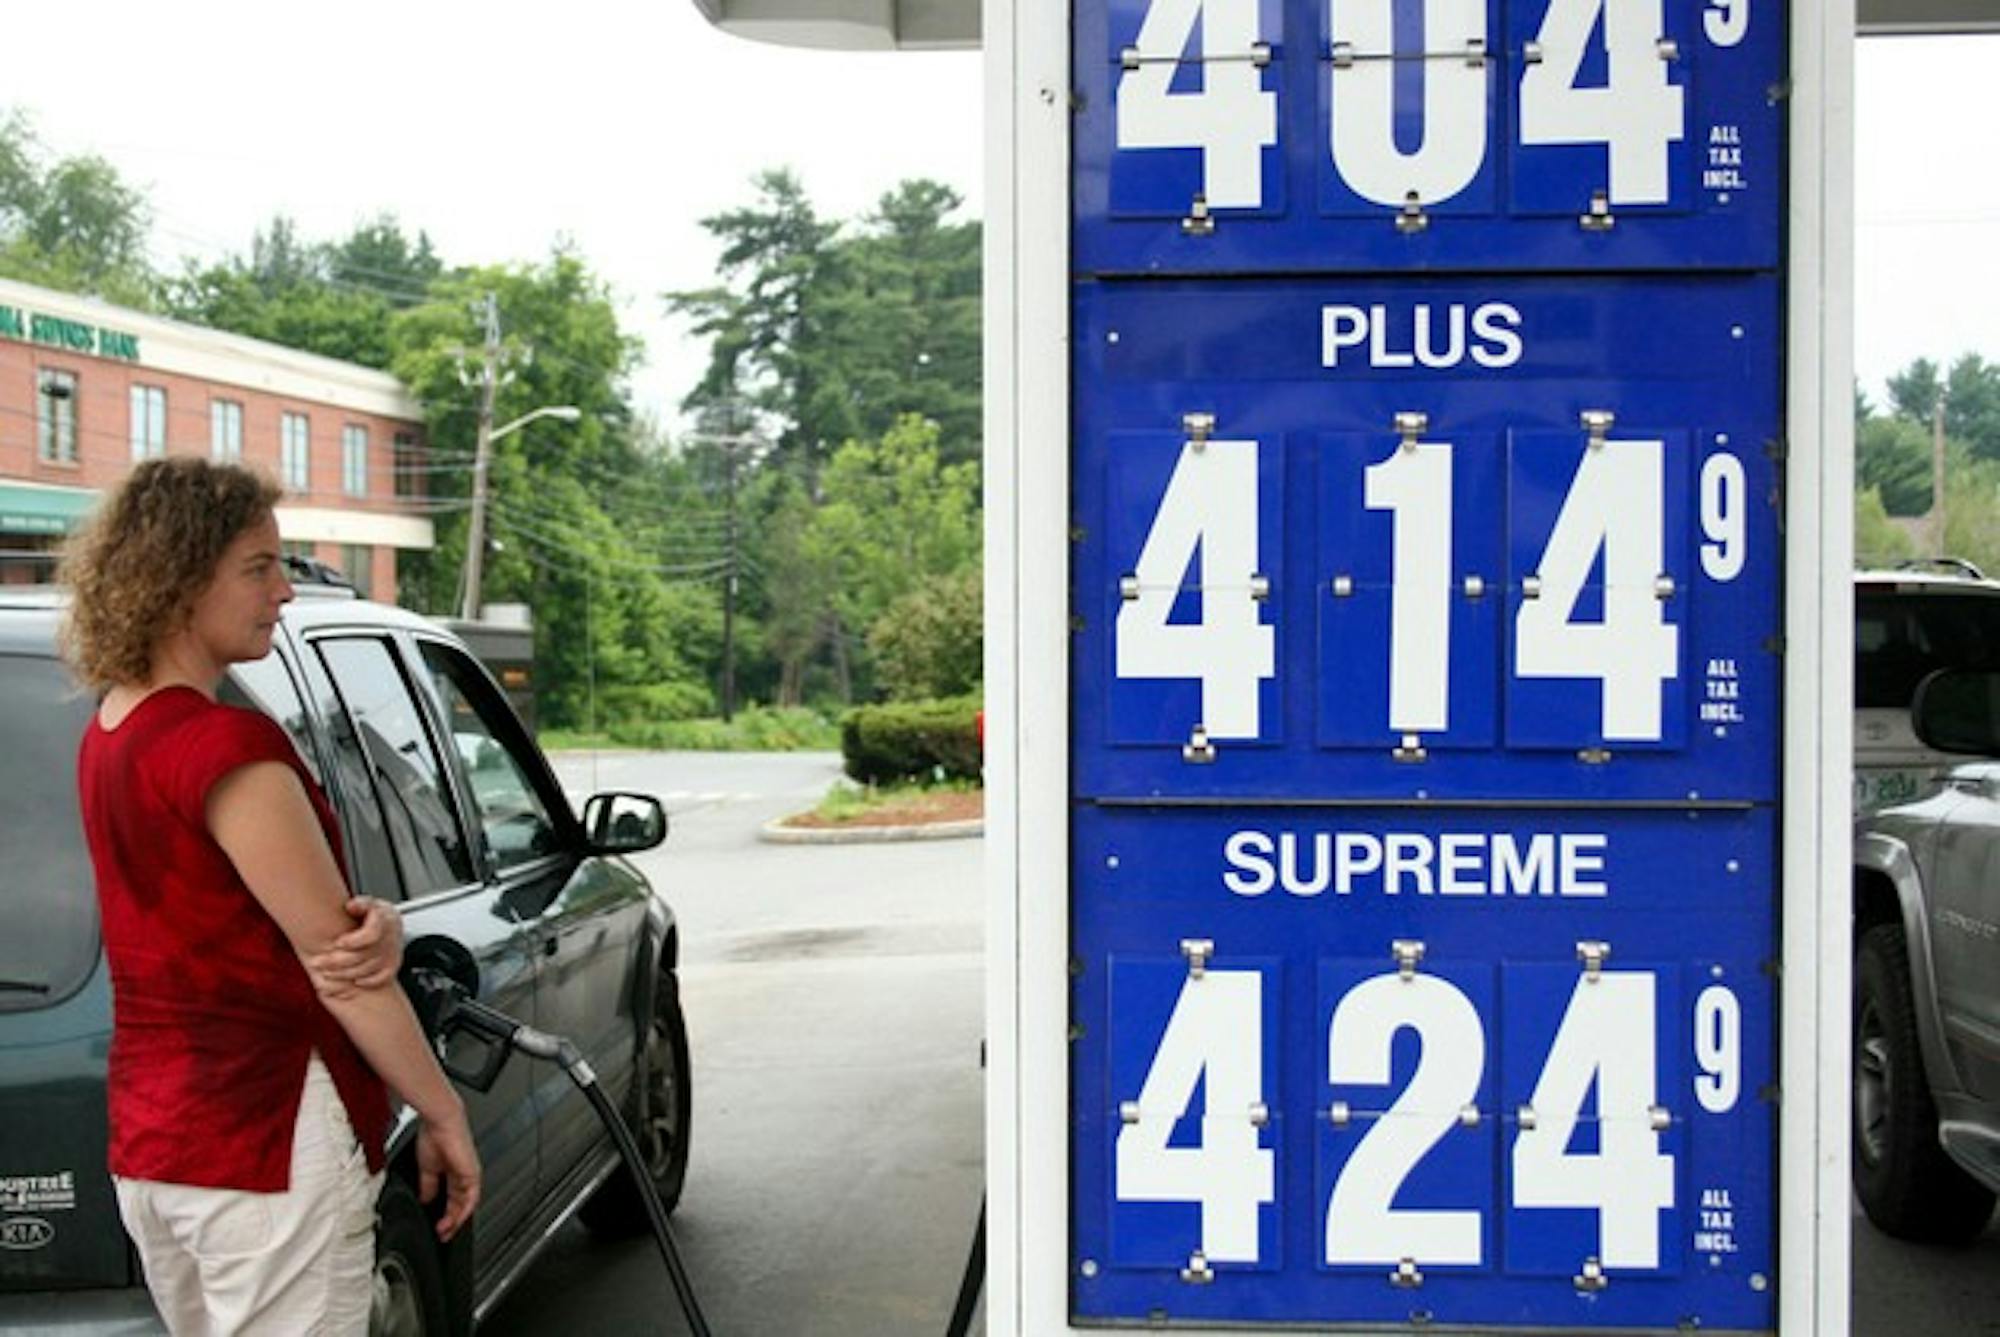 Students told The Dartmouth that this summer's high gas costs have affected their travel habits, as high prices at the pump have encouraged some to limit travel around campus and commutes home.